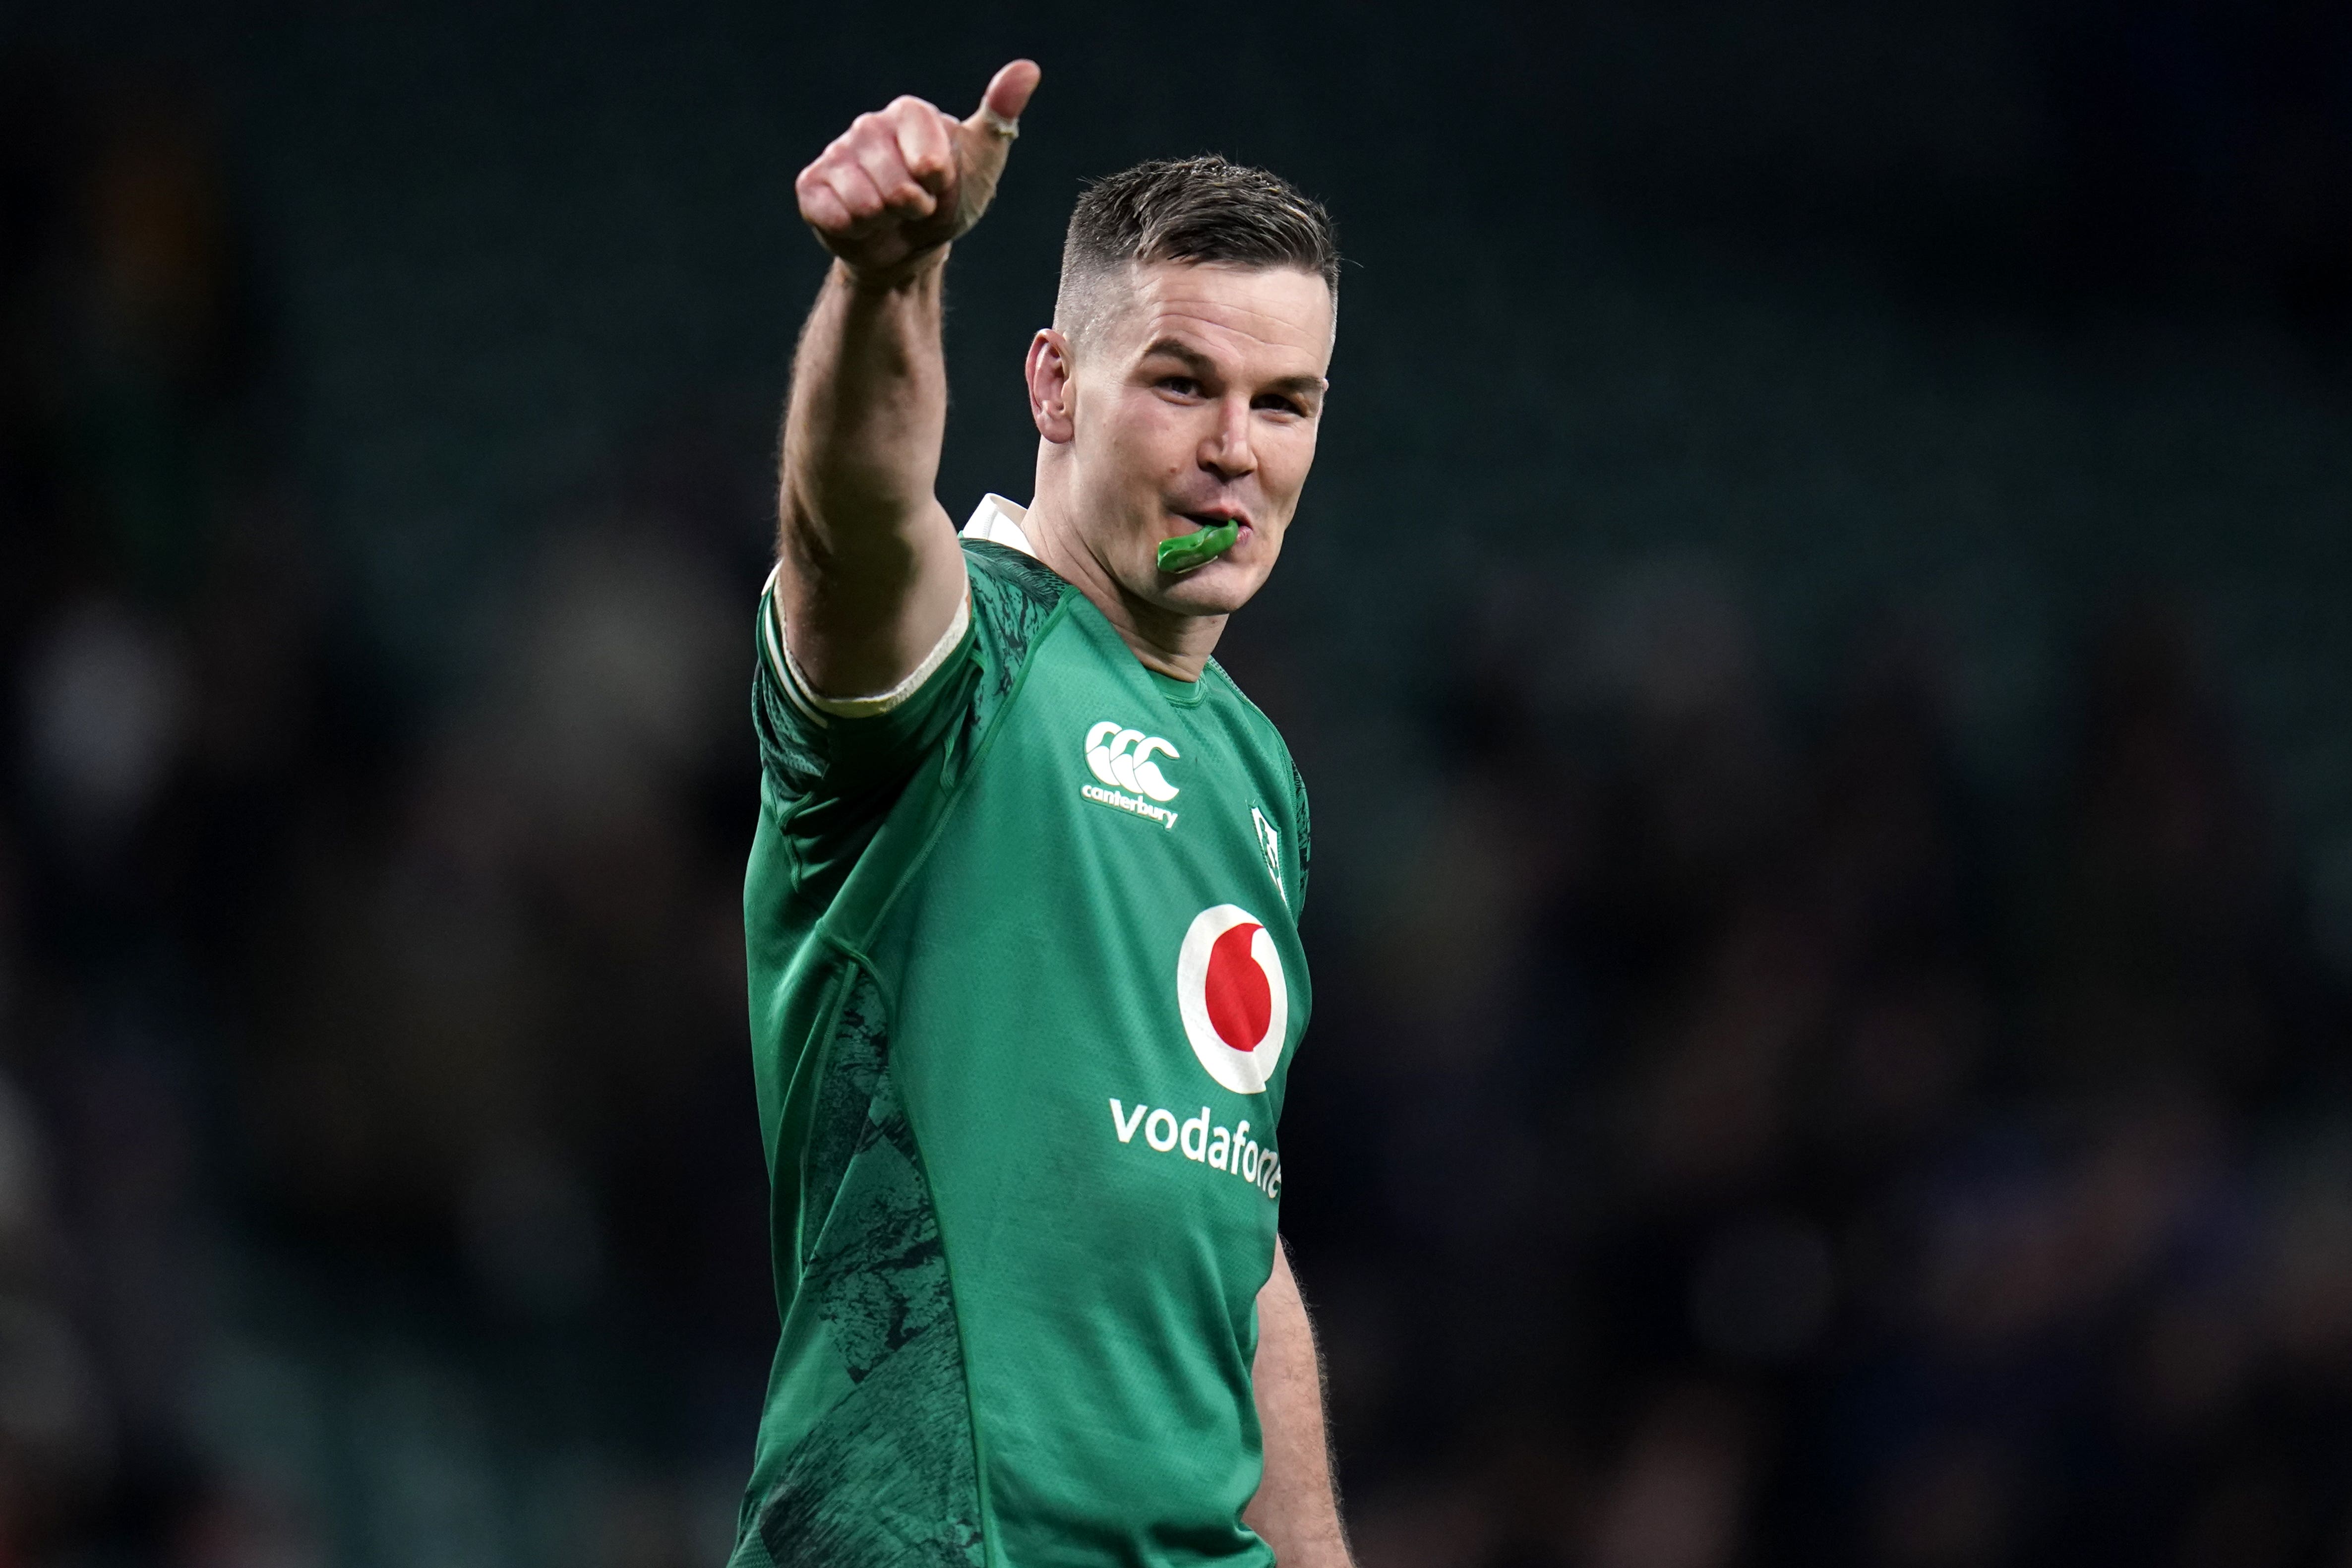 Johnny Sexton is looking to lead Ireland to Grand Slam glory in his final Six Nations game (Andrew Matthews/PA)